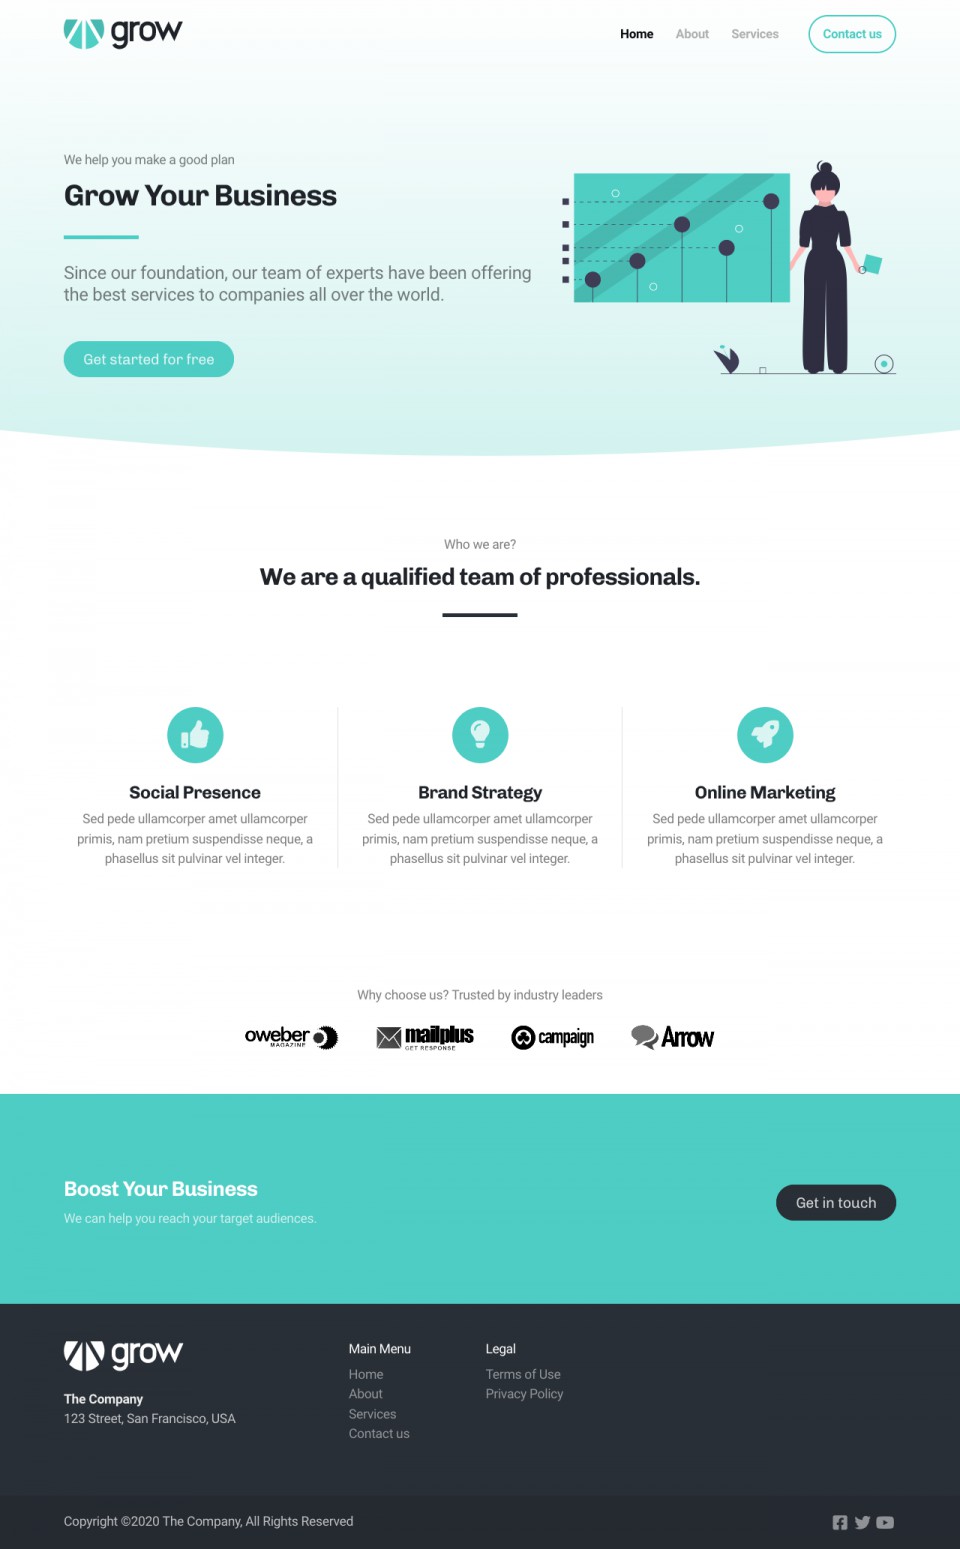 Grow Website Template - Ideal for small business owners, entrepreneurs, and startups looking to establish a strong online presence.